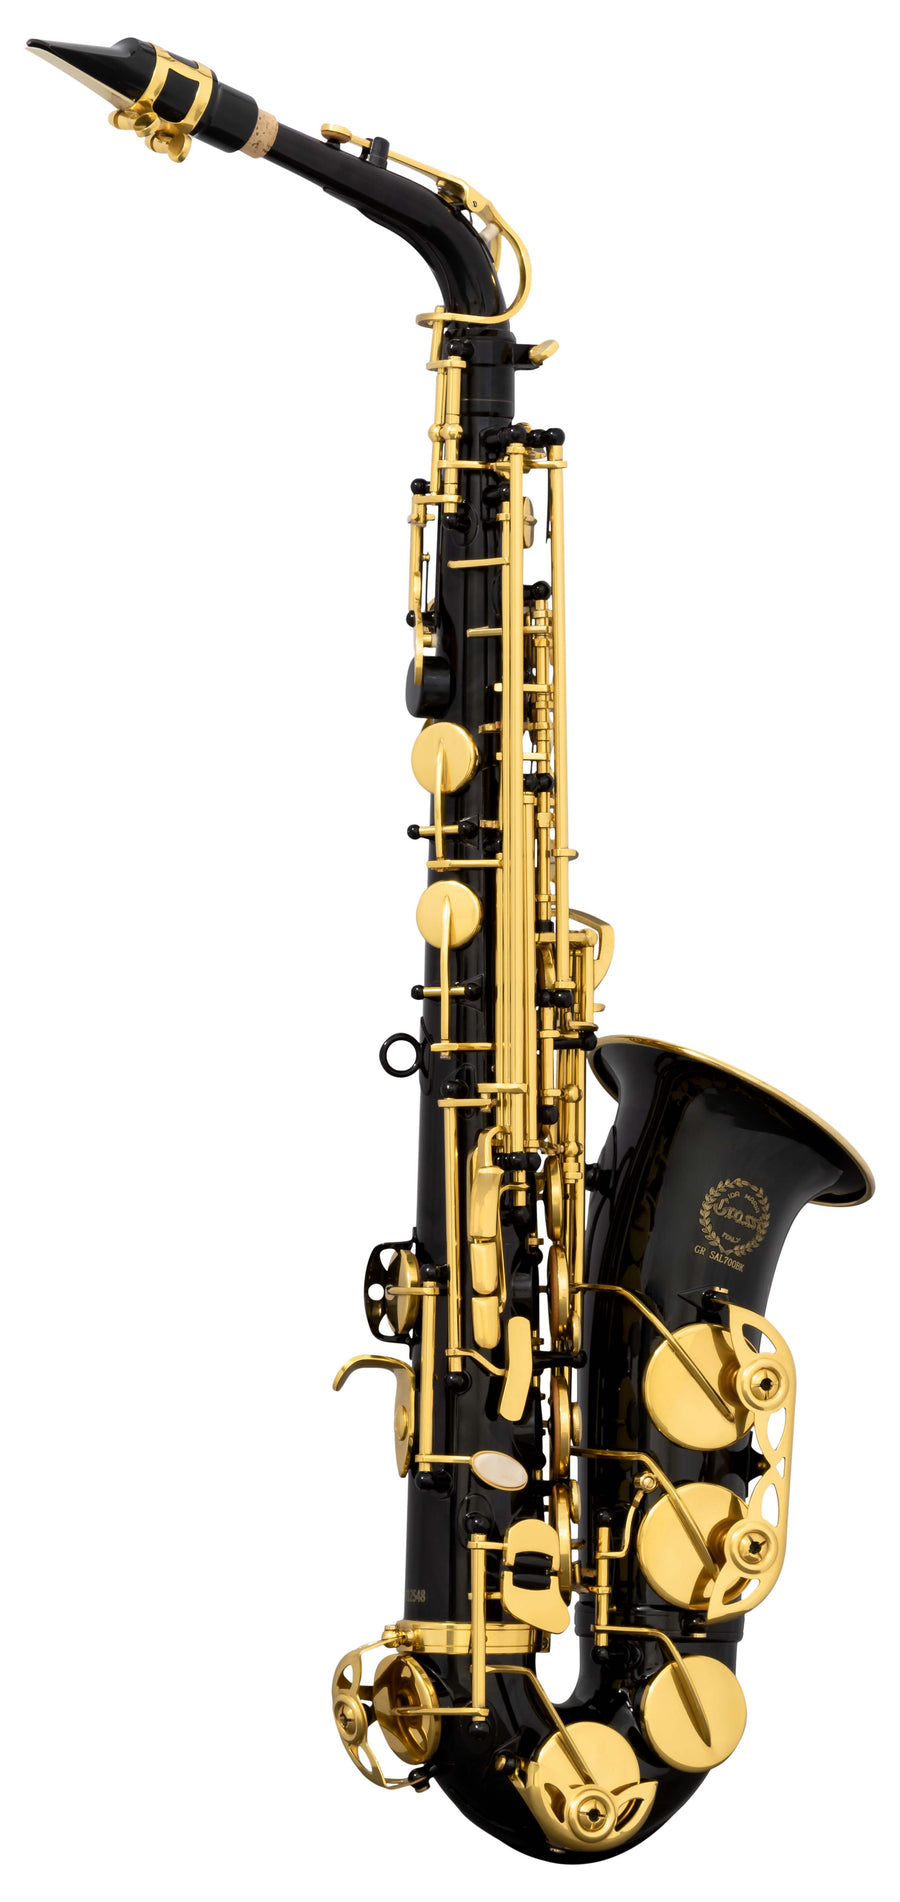 Grassi GR SAL700BK Alto Saxophone in Eb Black and Yellow Brass Lacquered (School Series)